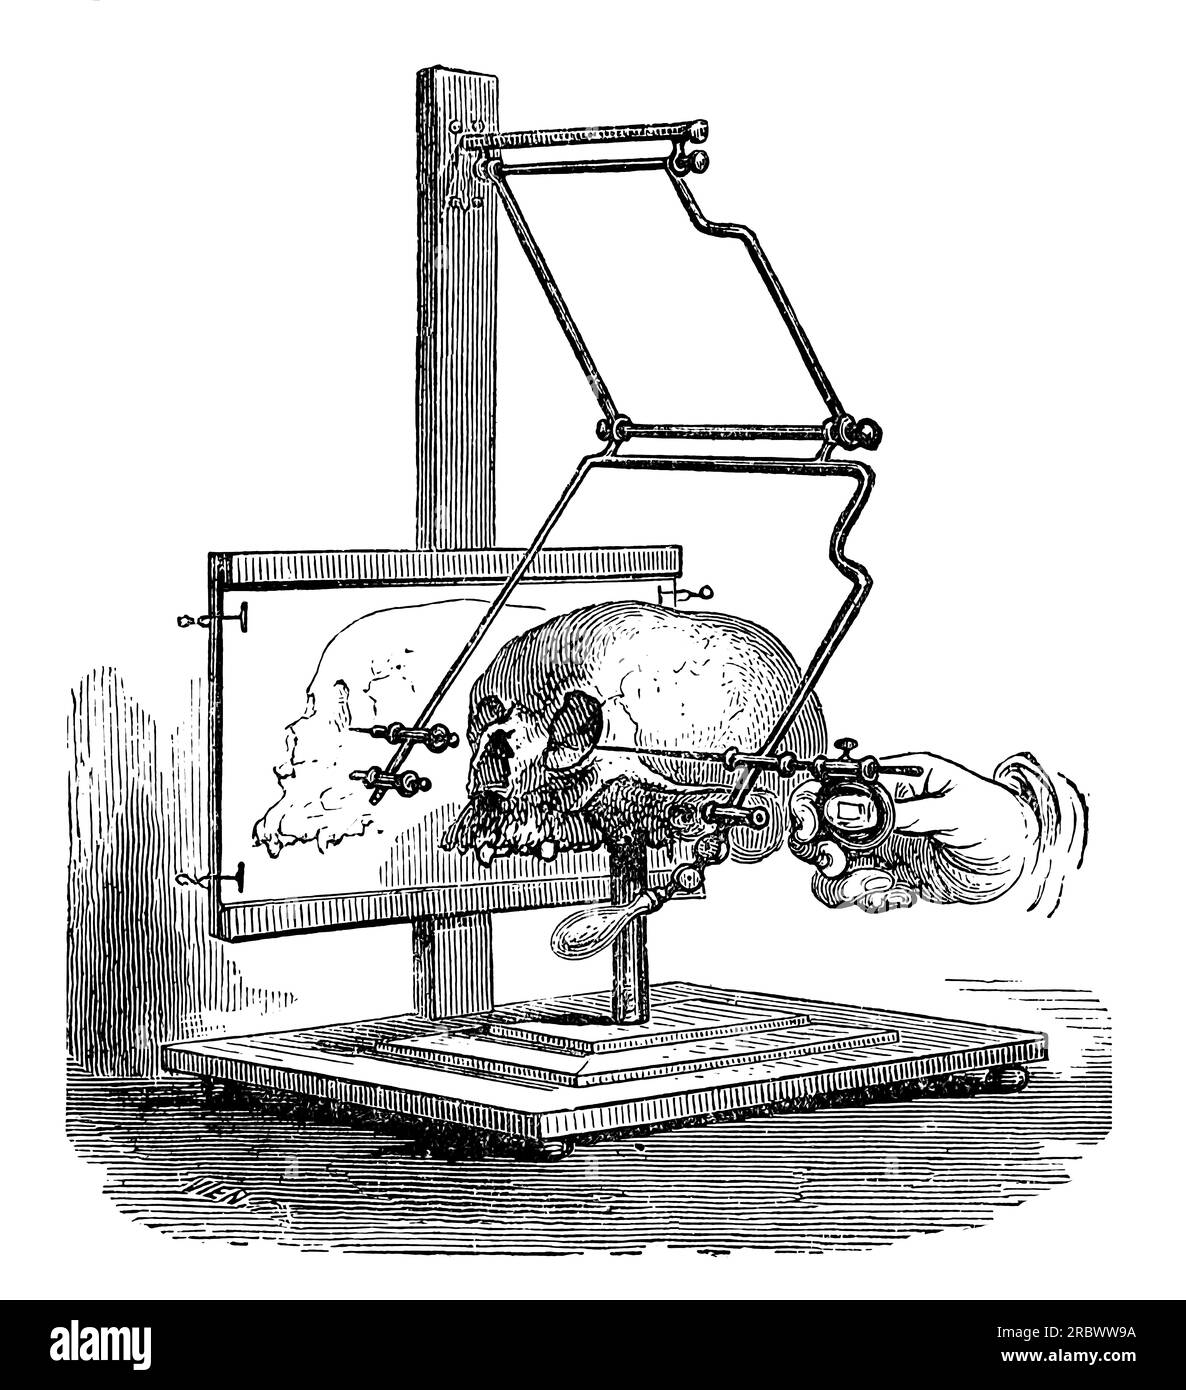 Stereograph designed by Pierre Paul Broca and manufactured by Mathieu Stock Photo